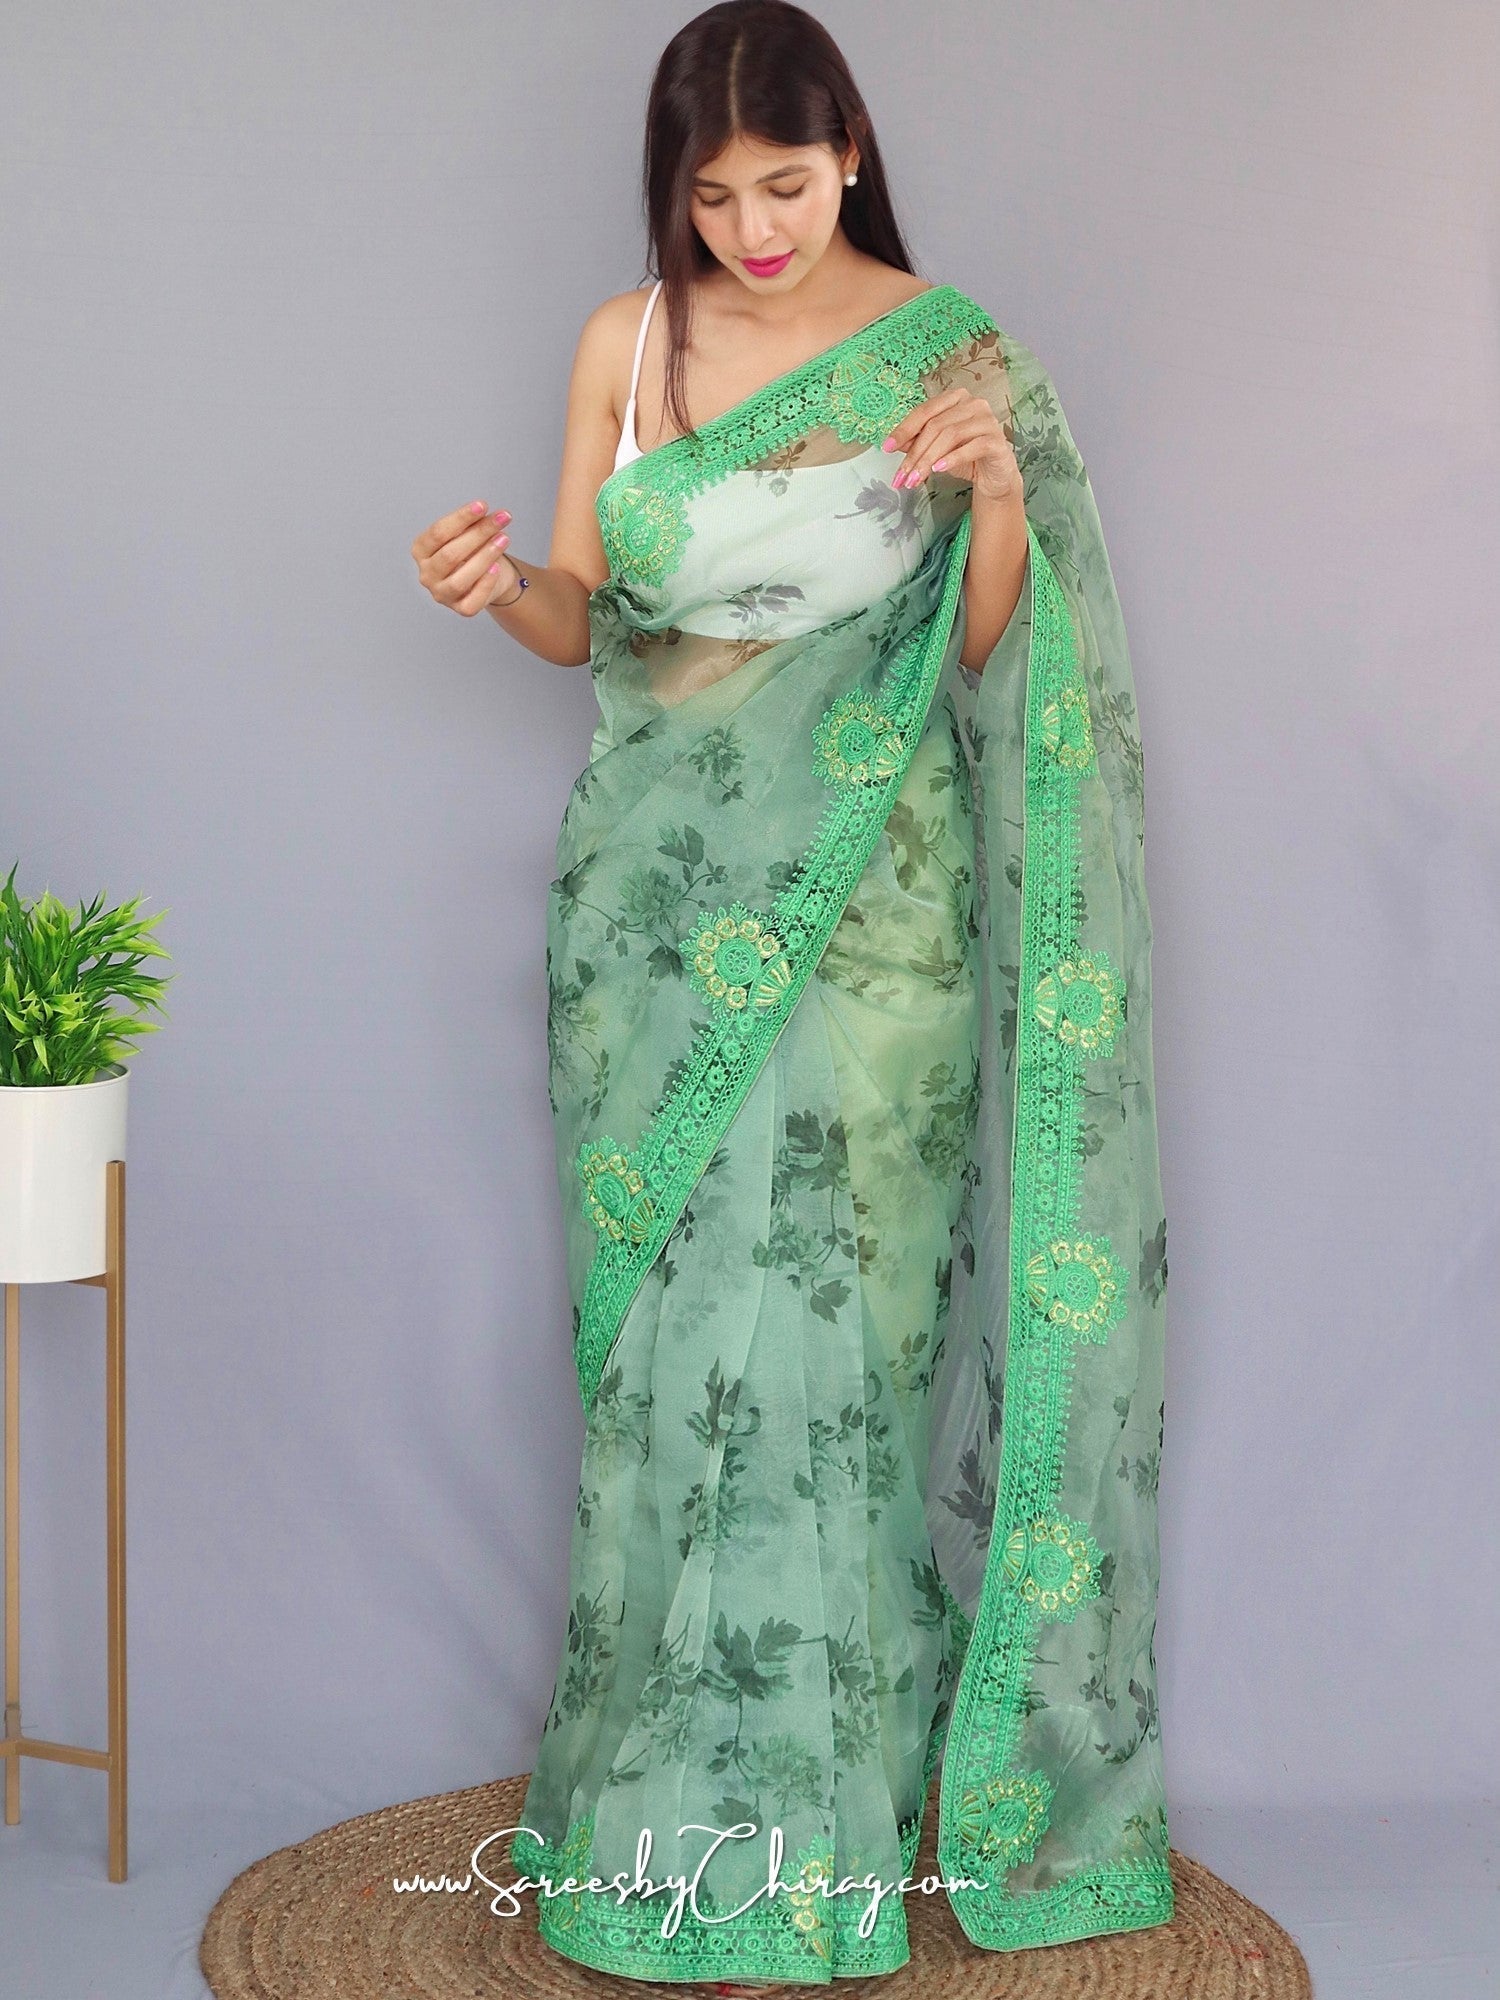 Lightweight Organza Saree with Embroidery | Man-Mohini